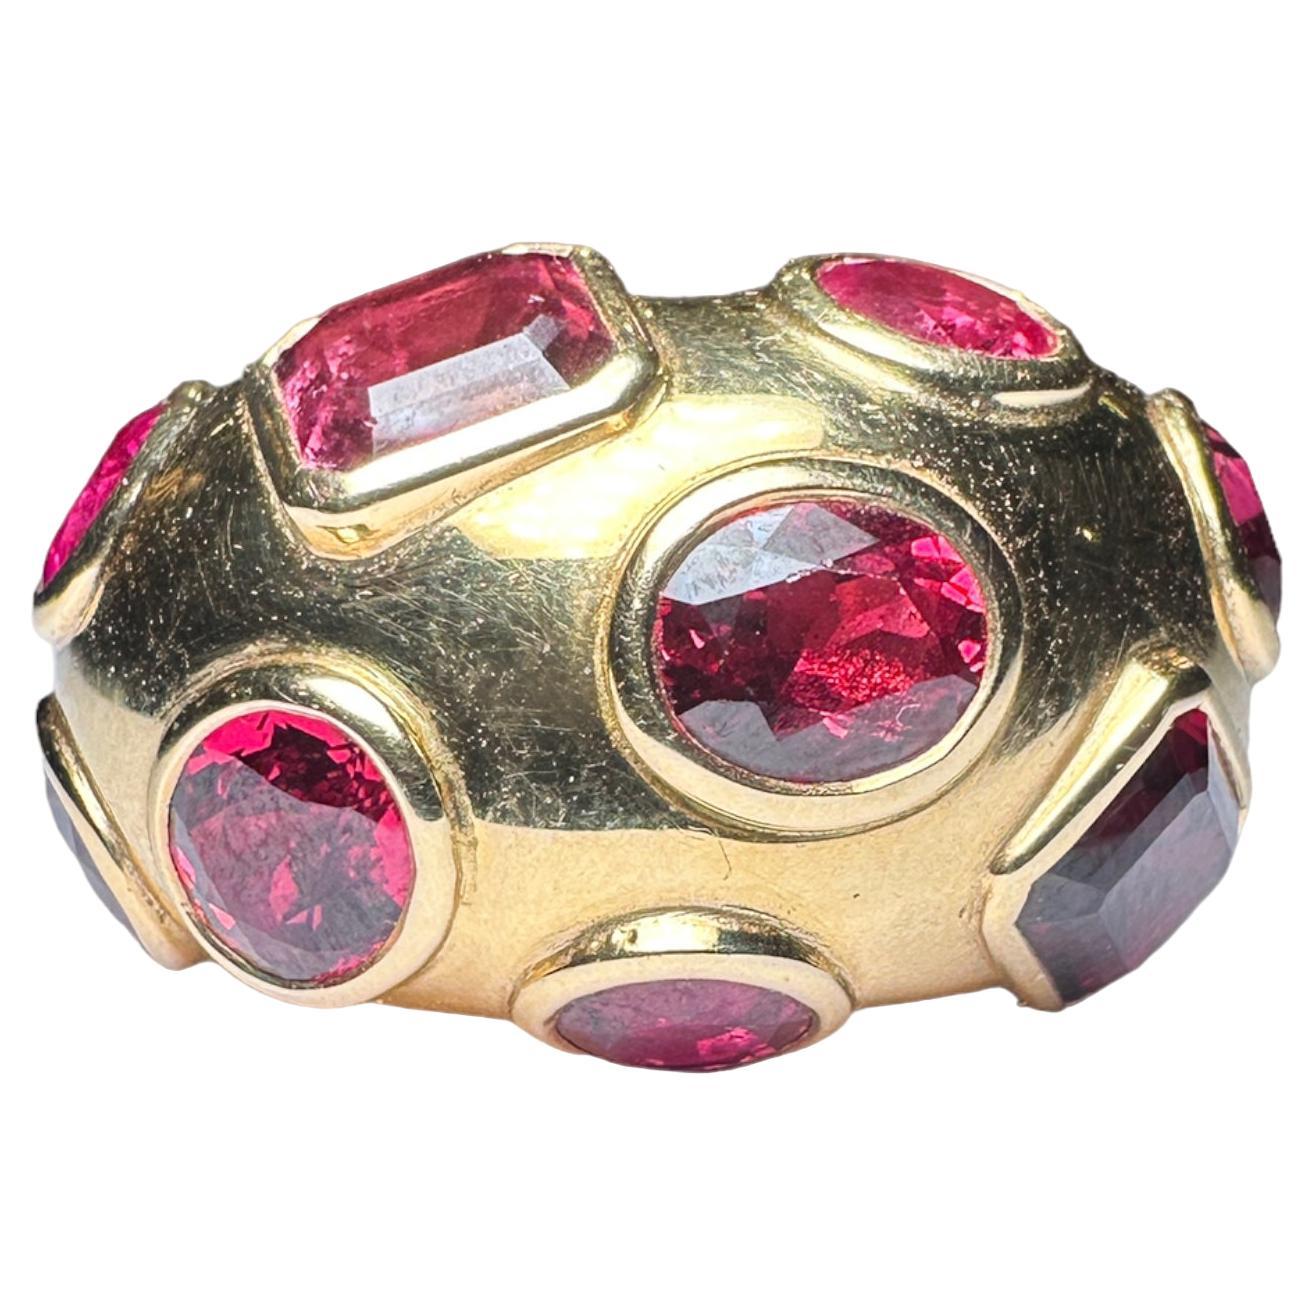 18k Gold Ring with Rubies, Rubellite Tourmalines and Red Spinels